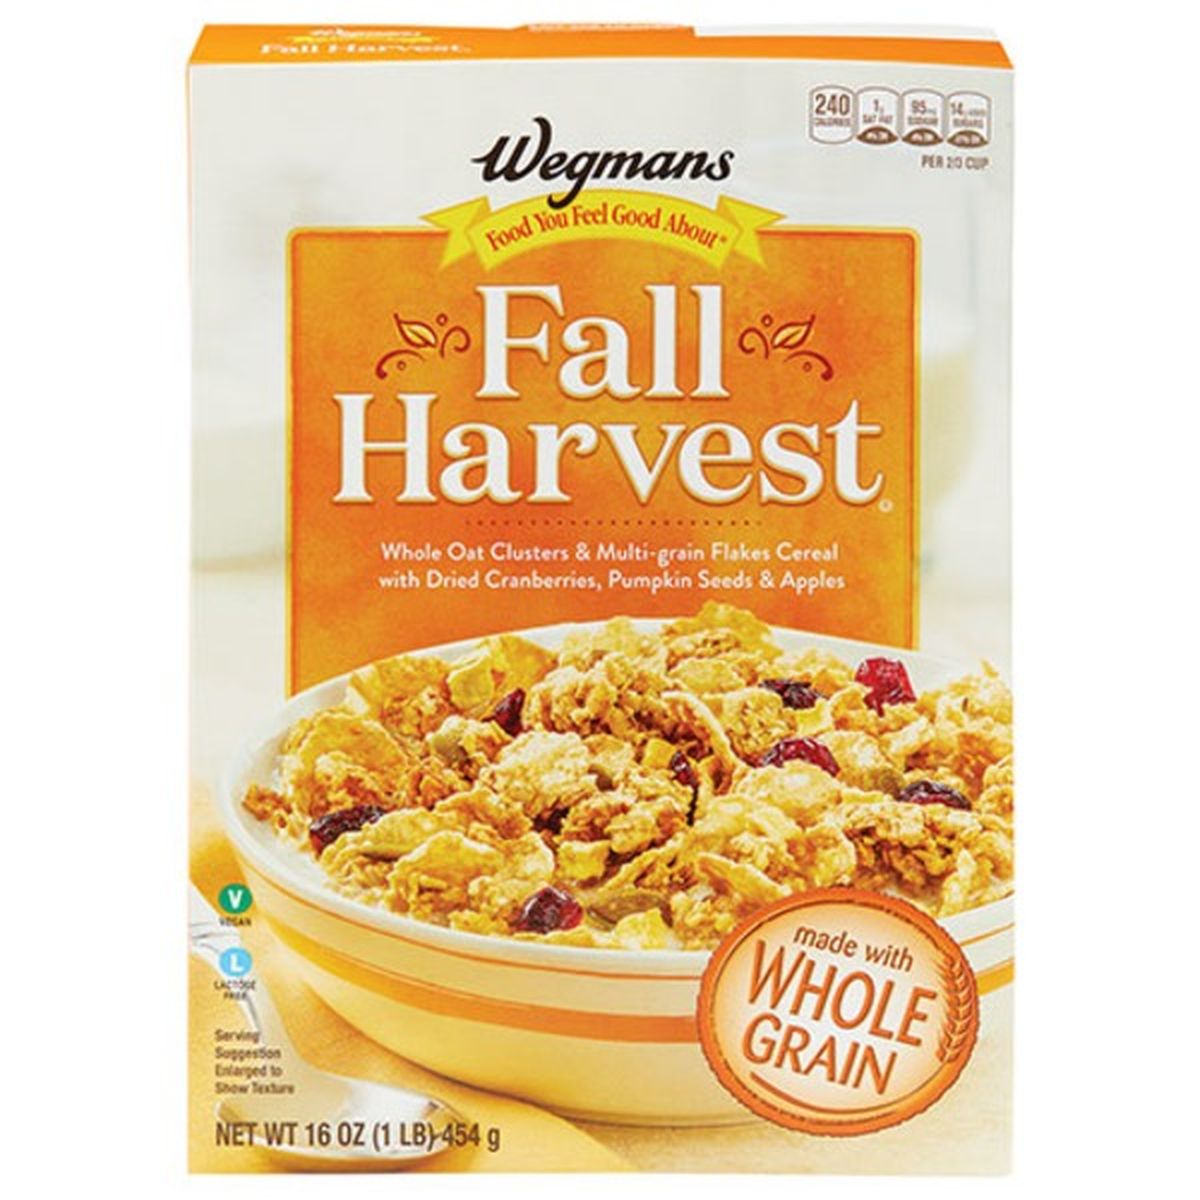 Calories in Wegmans Fall Harvest Cereal